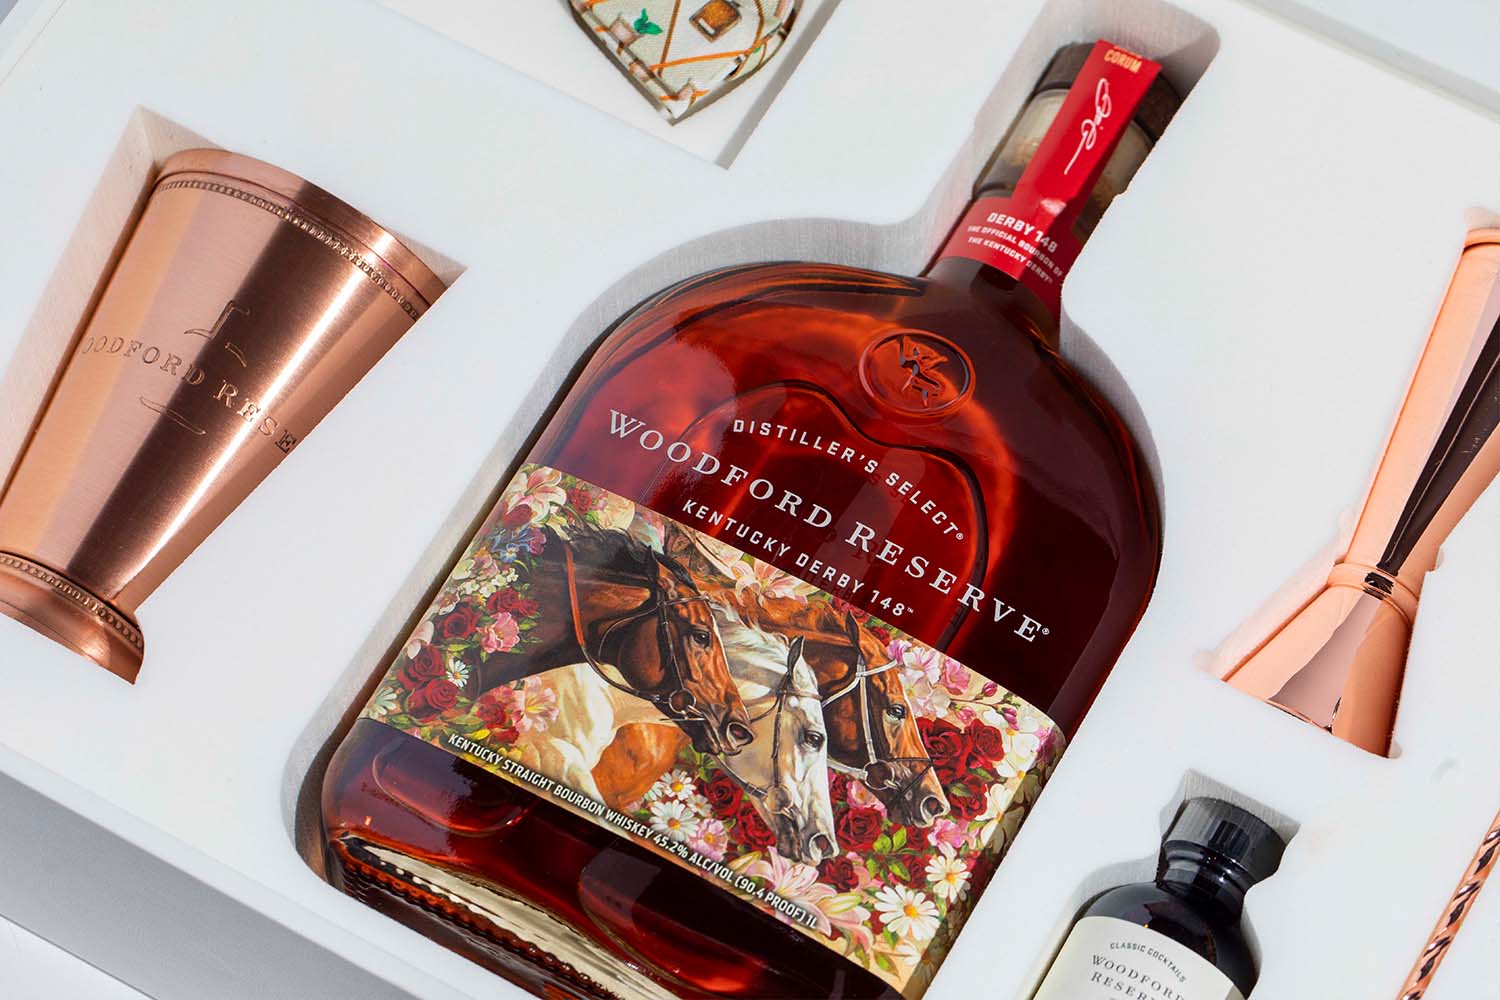 a bottle of Woodford reserve with horse decoration